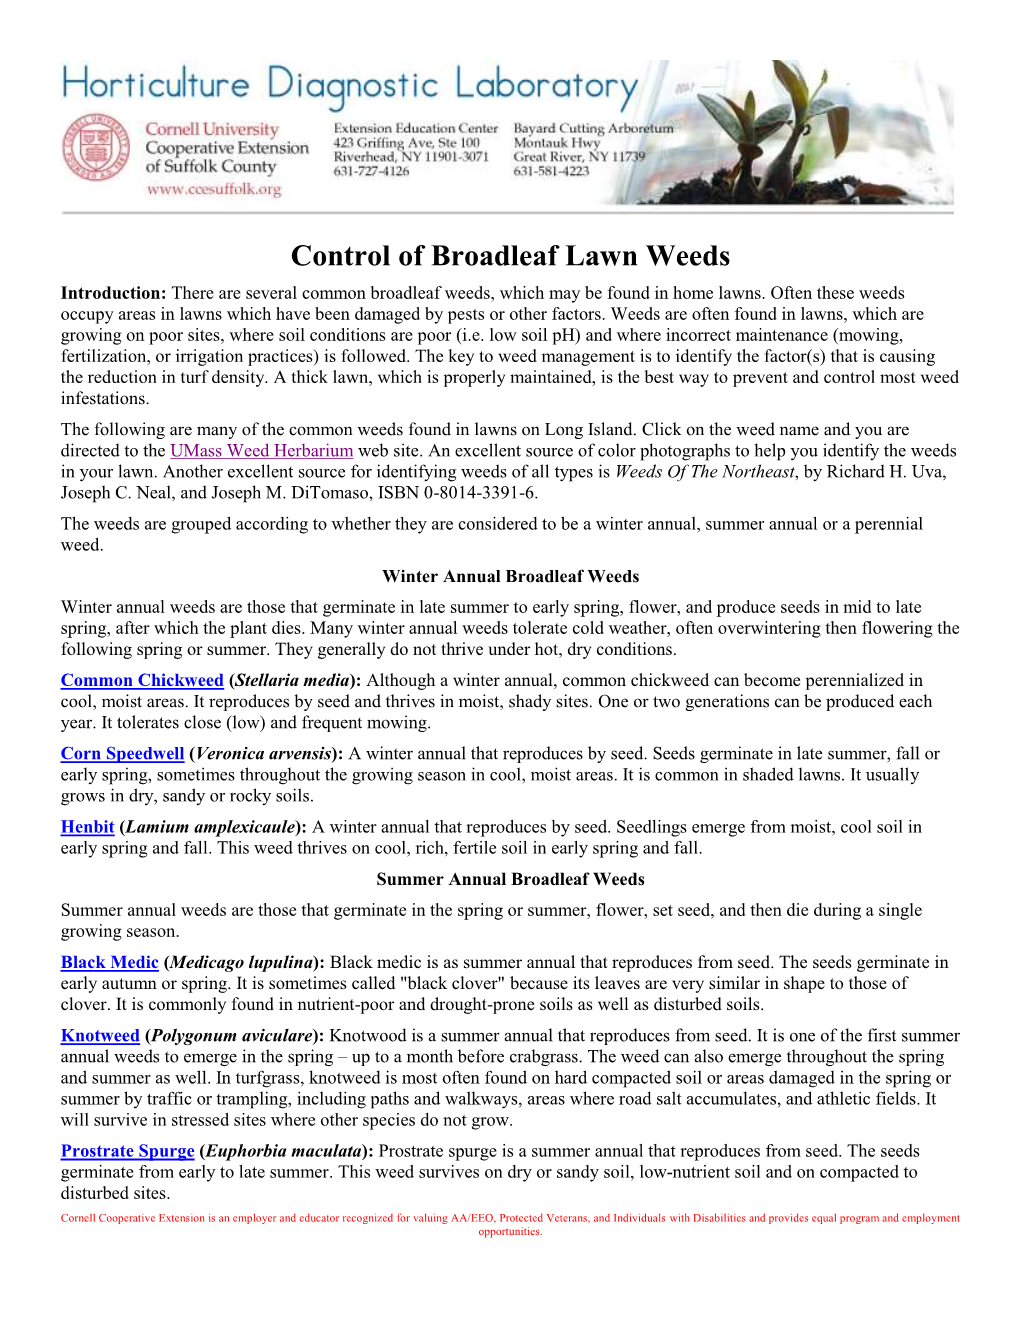 Control of Broadleaf Lawn Weeds Introduction: There Are Several Common Broadleaf Weeds, Which May Be Found in Home Lawns